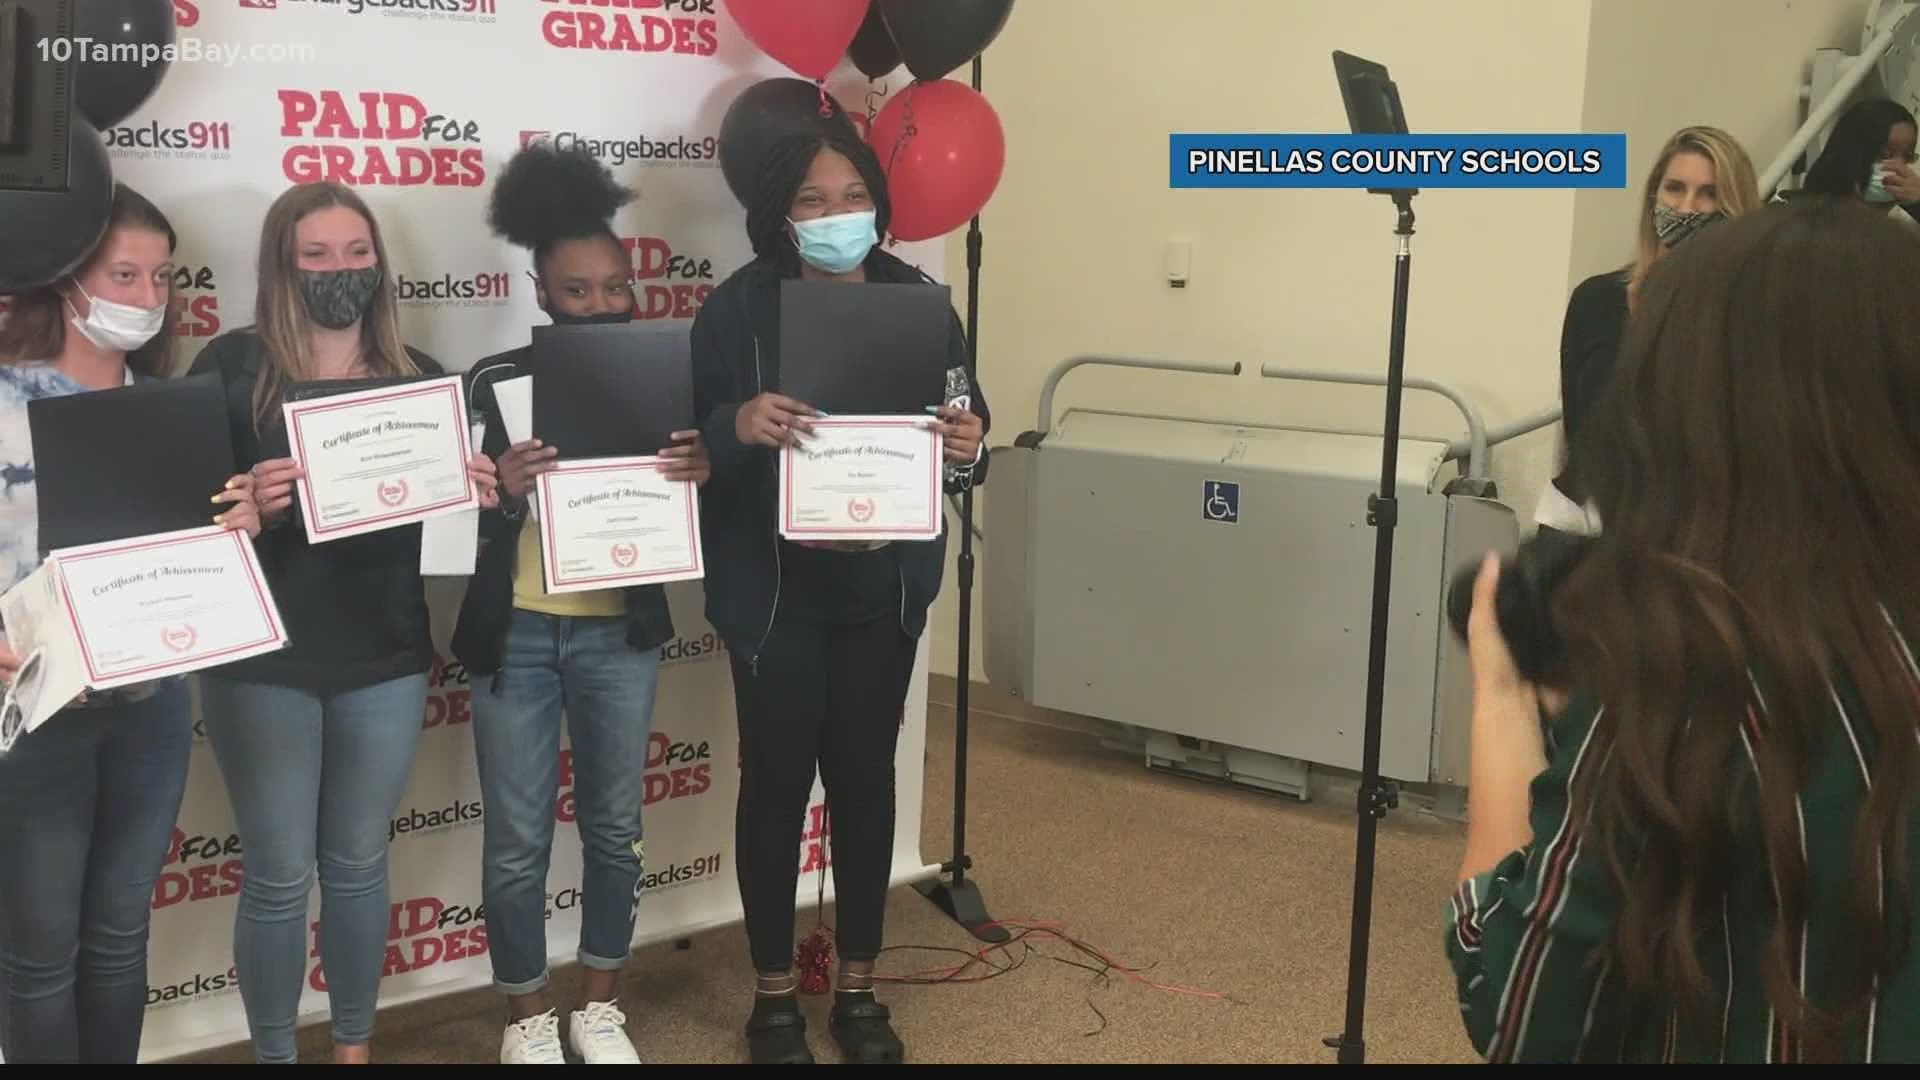 Nearly 100 Pinellas County students received $500 for good grades at graduation.